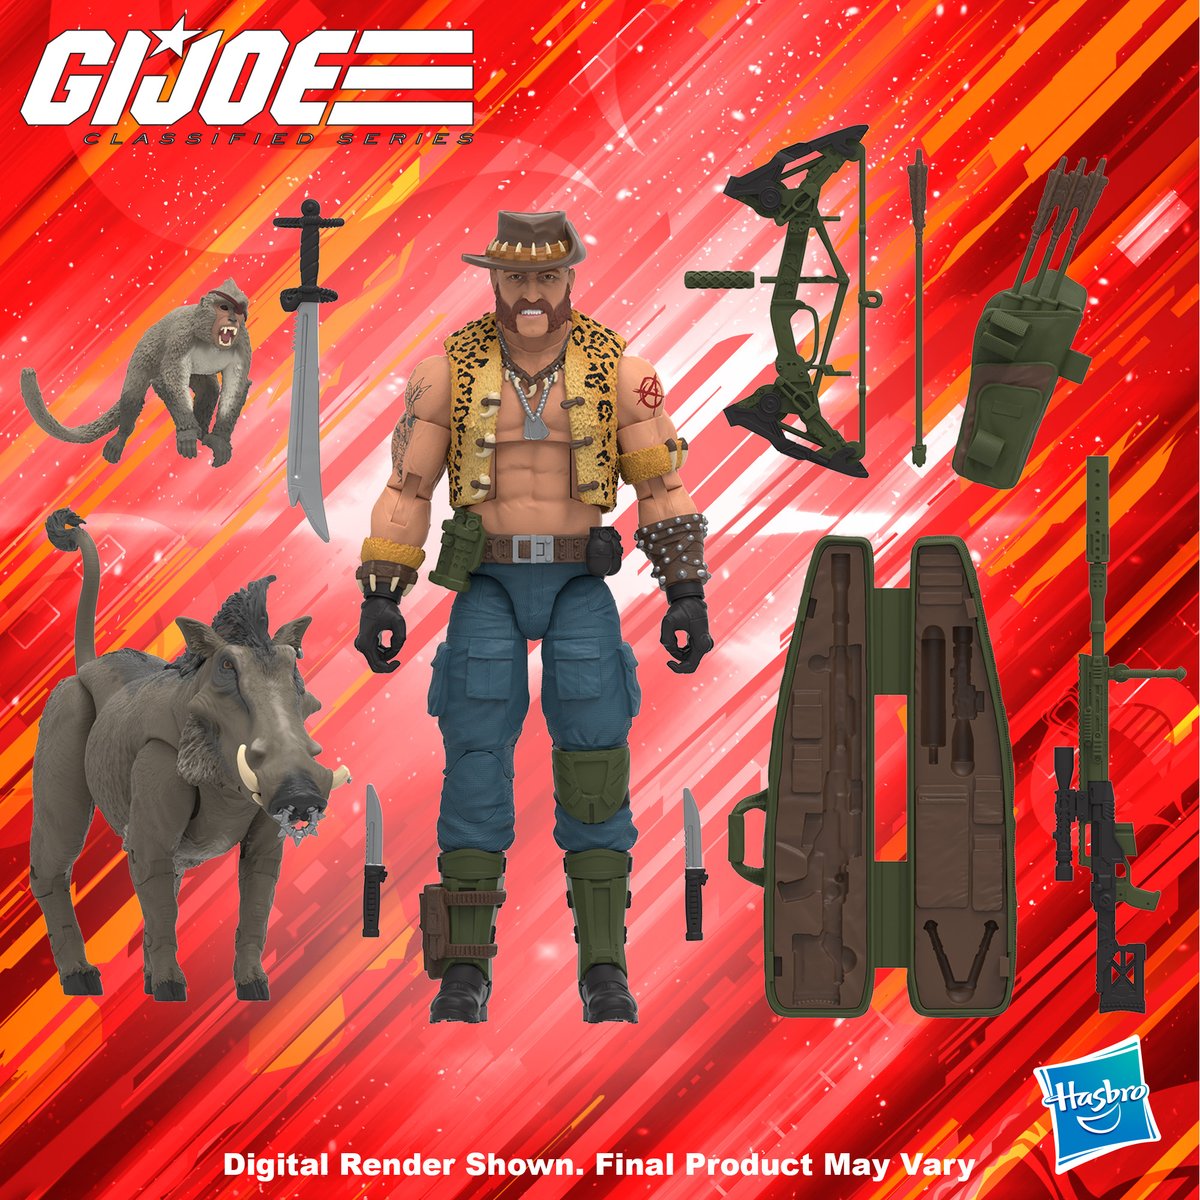 Last, but not least! #GIJoeClassifiedSeries loves to draw inspiration from the storied past of Joe lore! With the #ClassifiedSeries debut of #Dreadnok Gnawgahyde, Porkbelly, and Yobbo, the mercenary poacher figure comes with not 1, but 2 pets – a warthog and macaque!